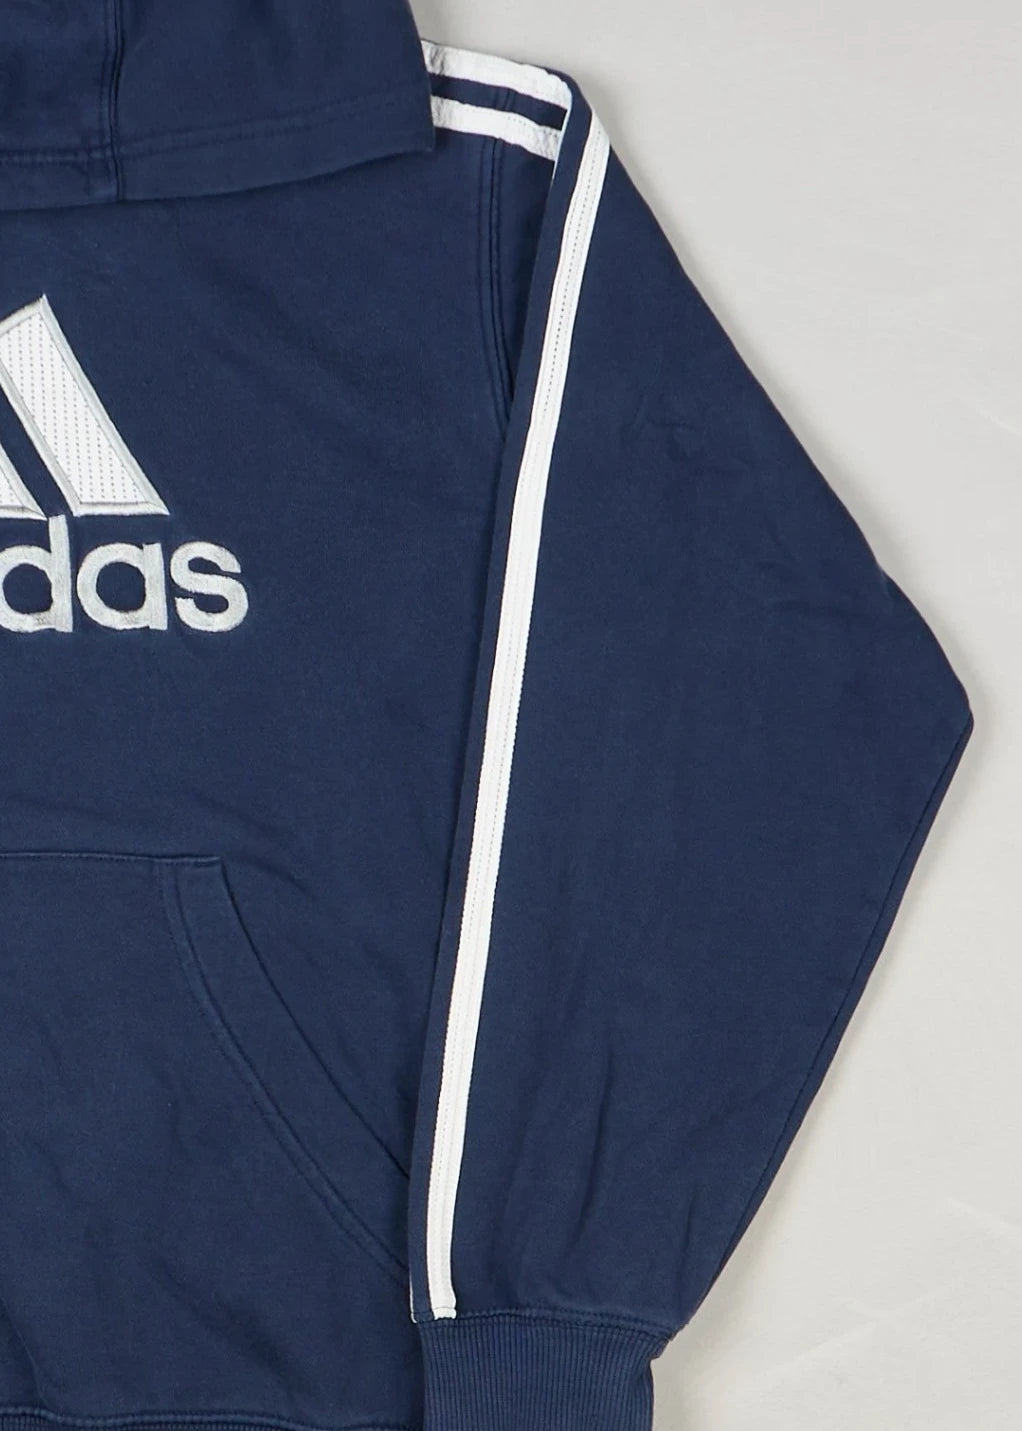 Adidas - Hoodie (S) Right